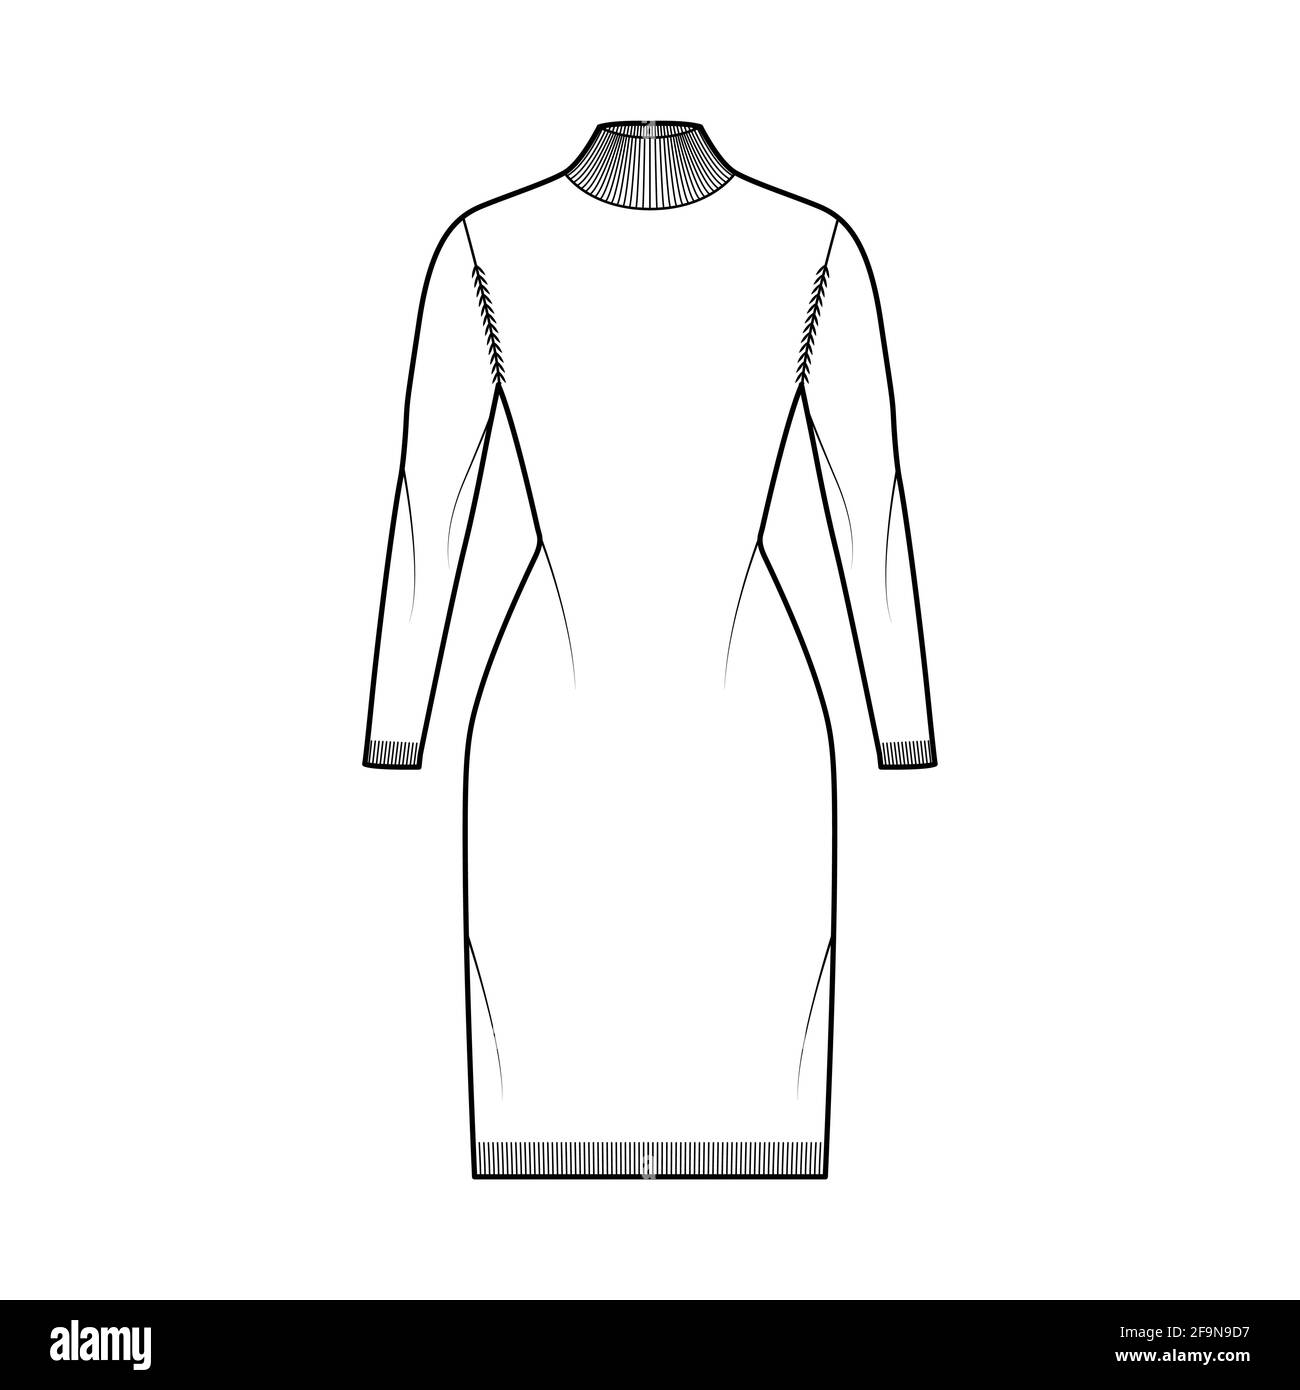 Turtleneck dress Sweater technical fashion illustration with long raglan sleeves, fitted body, knee length, knit trim. Flat jumper apparel front, white color style. Women men unisex CAD mockup Stock Vector